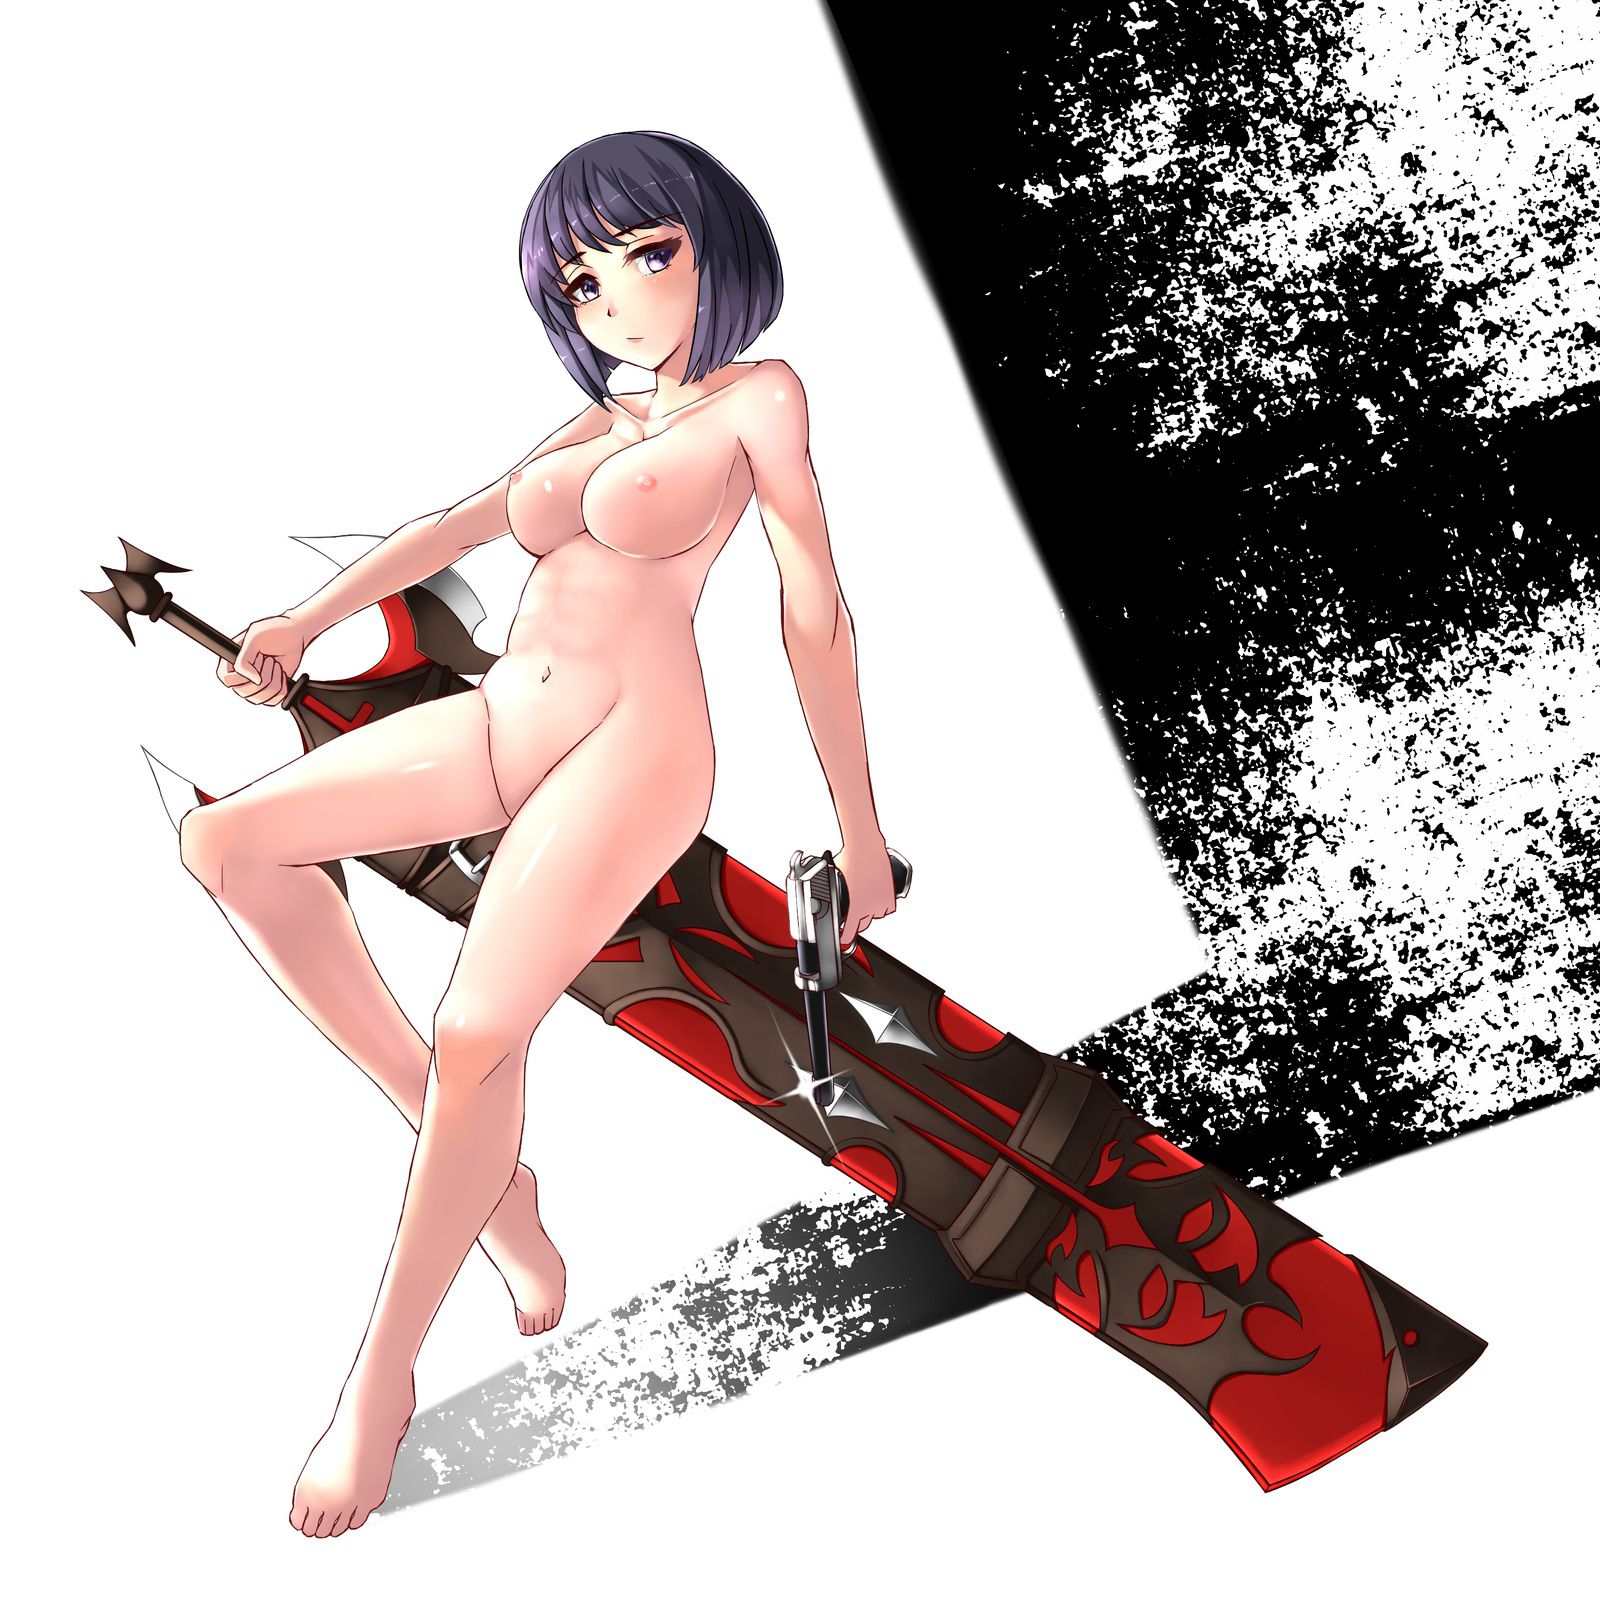 A girl holding a weapon naked or dressed in an erotic outfit! part11 22